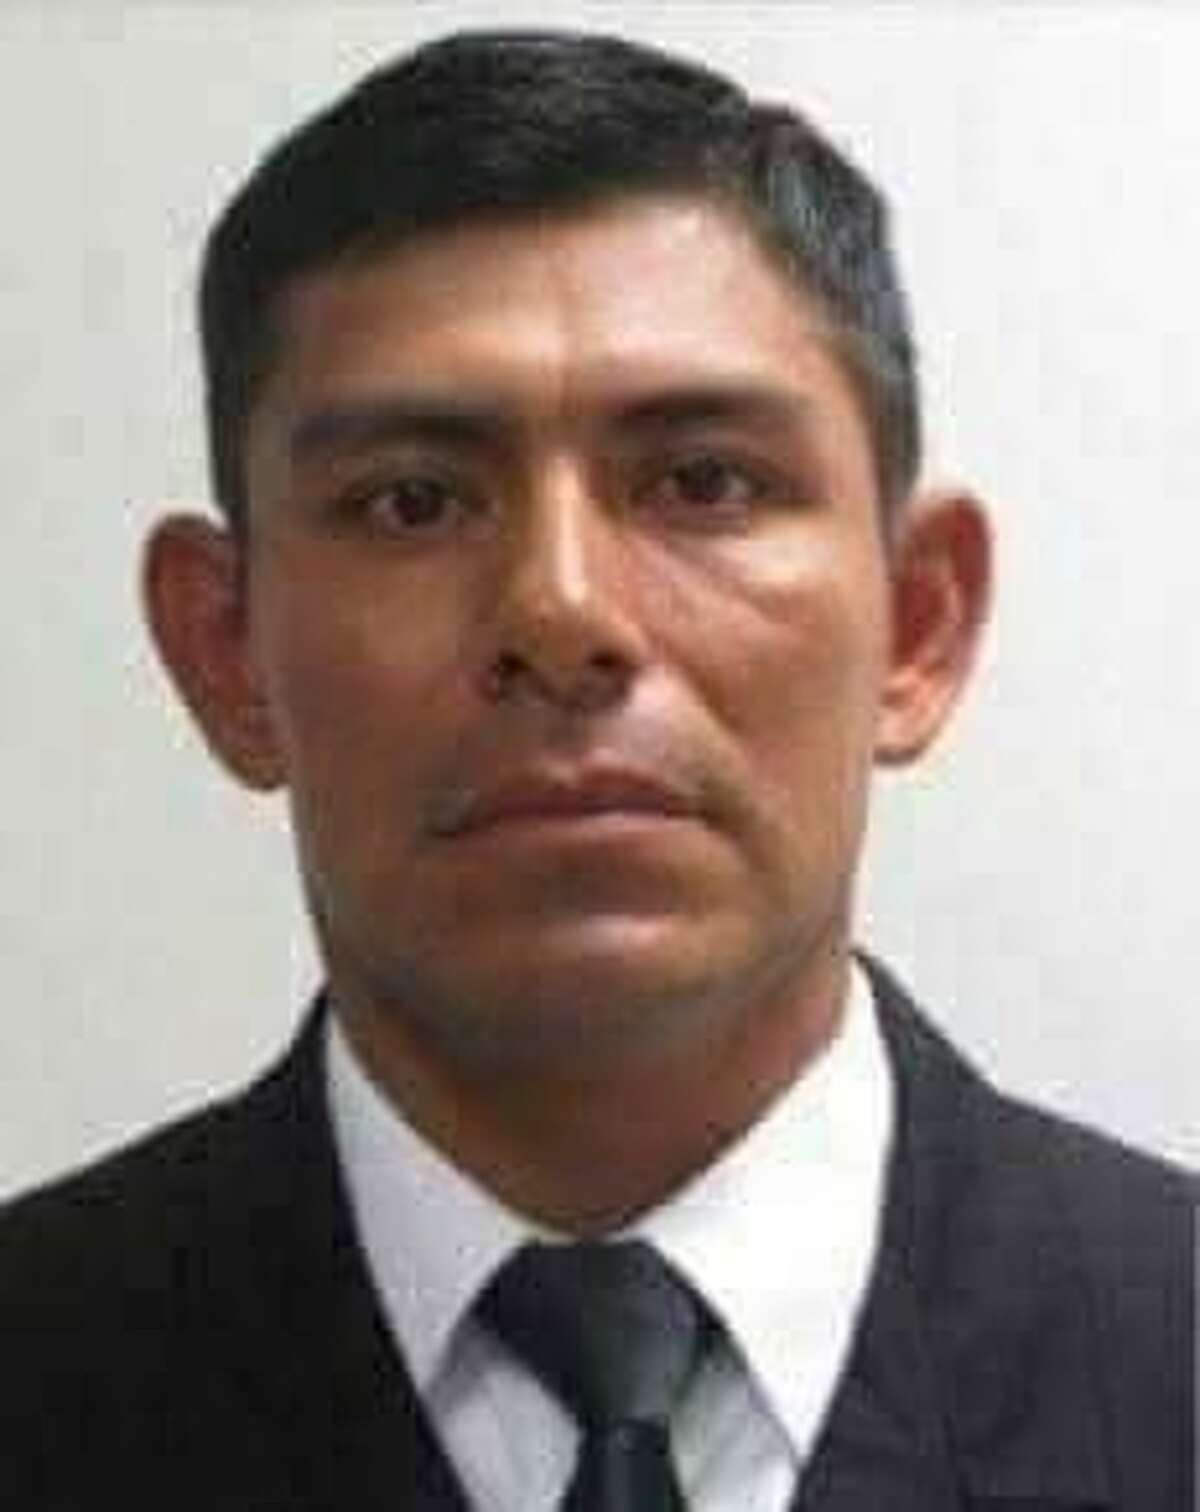 Capt. Mauro Hernandez, an 18-year veteran, was killed during shootout in Mexico Sunday.